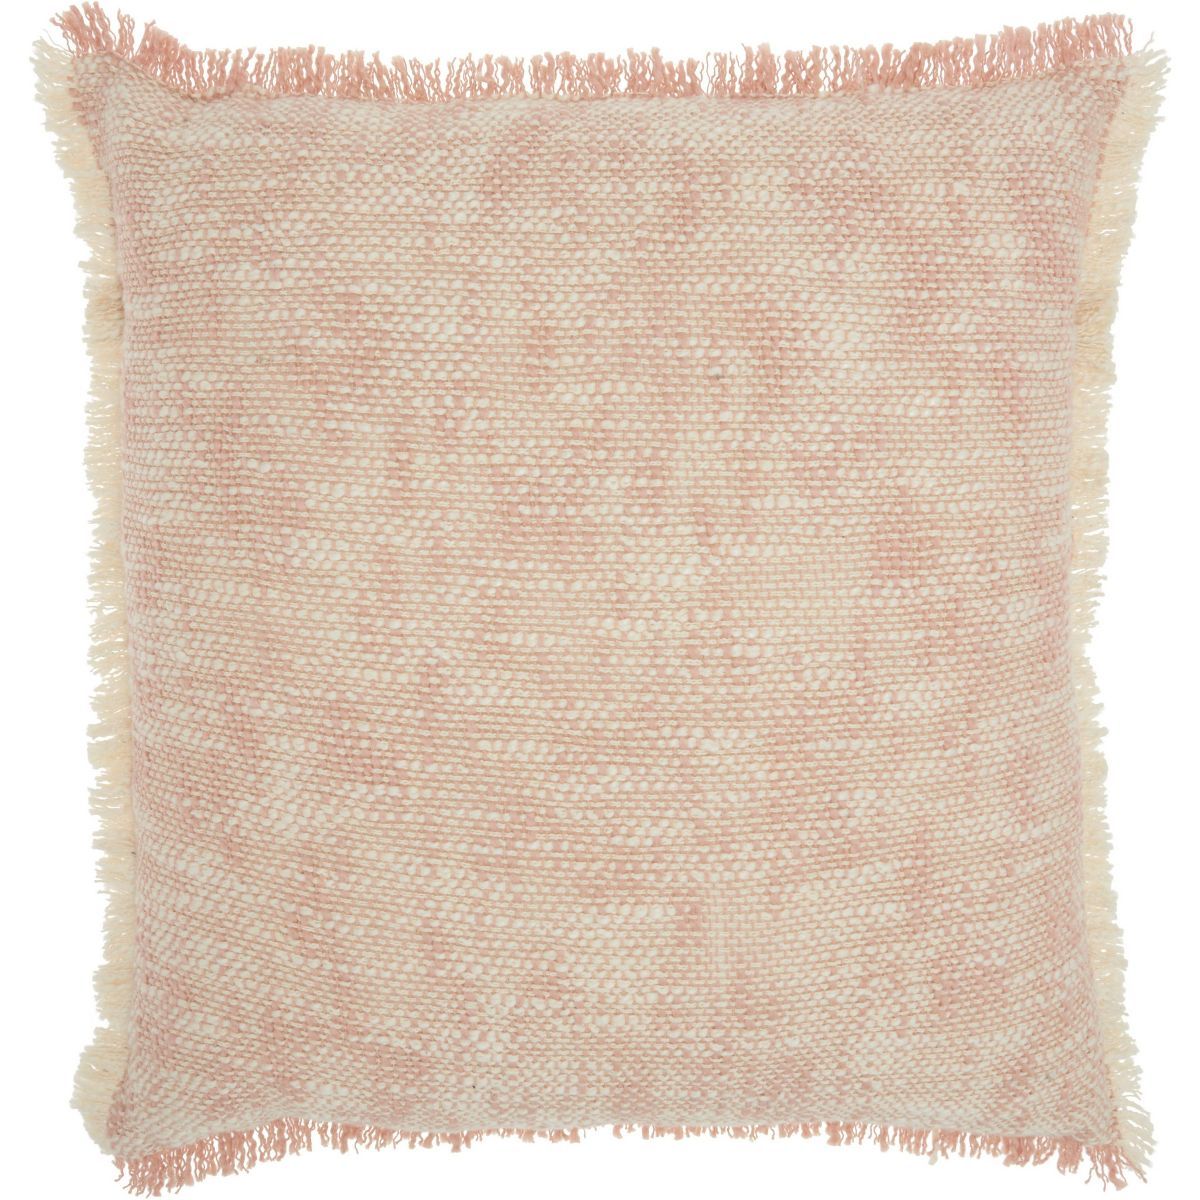 20"x20" Oversize Life Styles Woven Fringe Square Throw Pillow - Nourison | Target